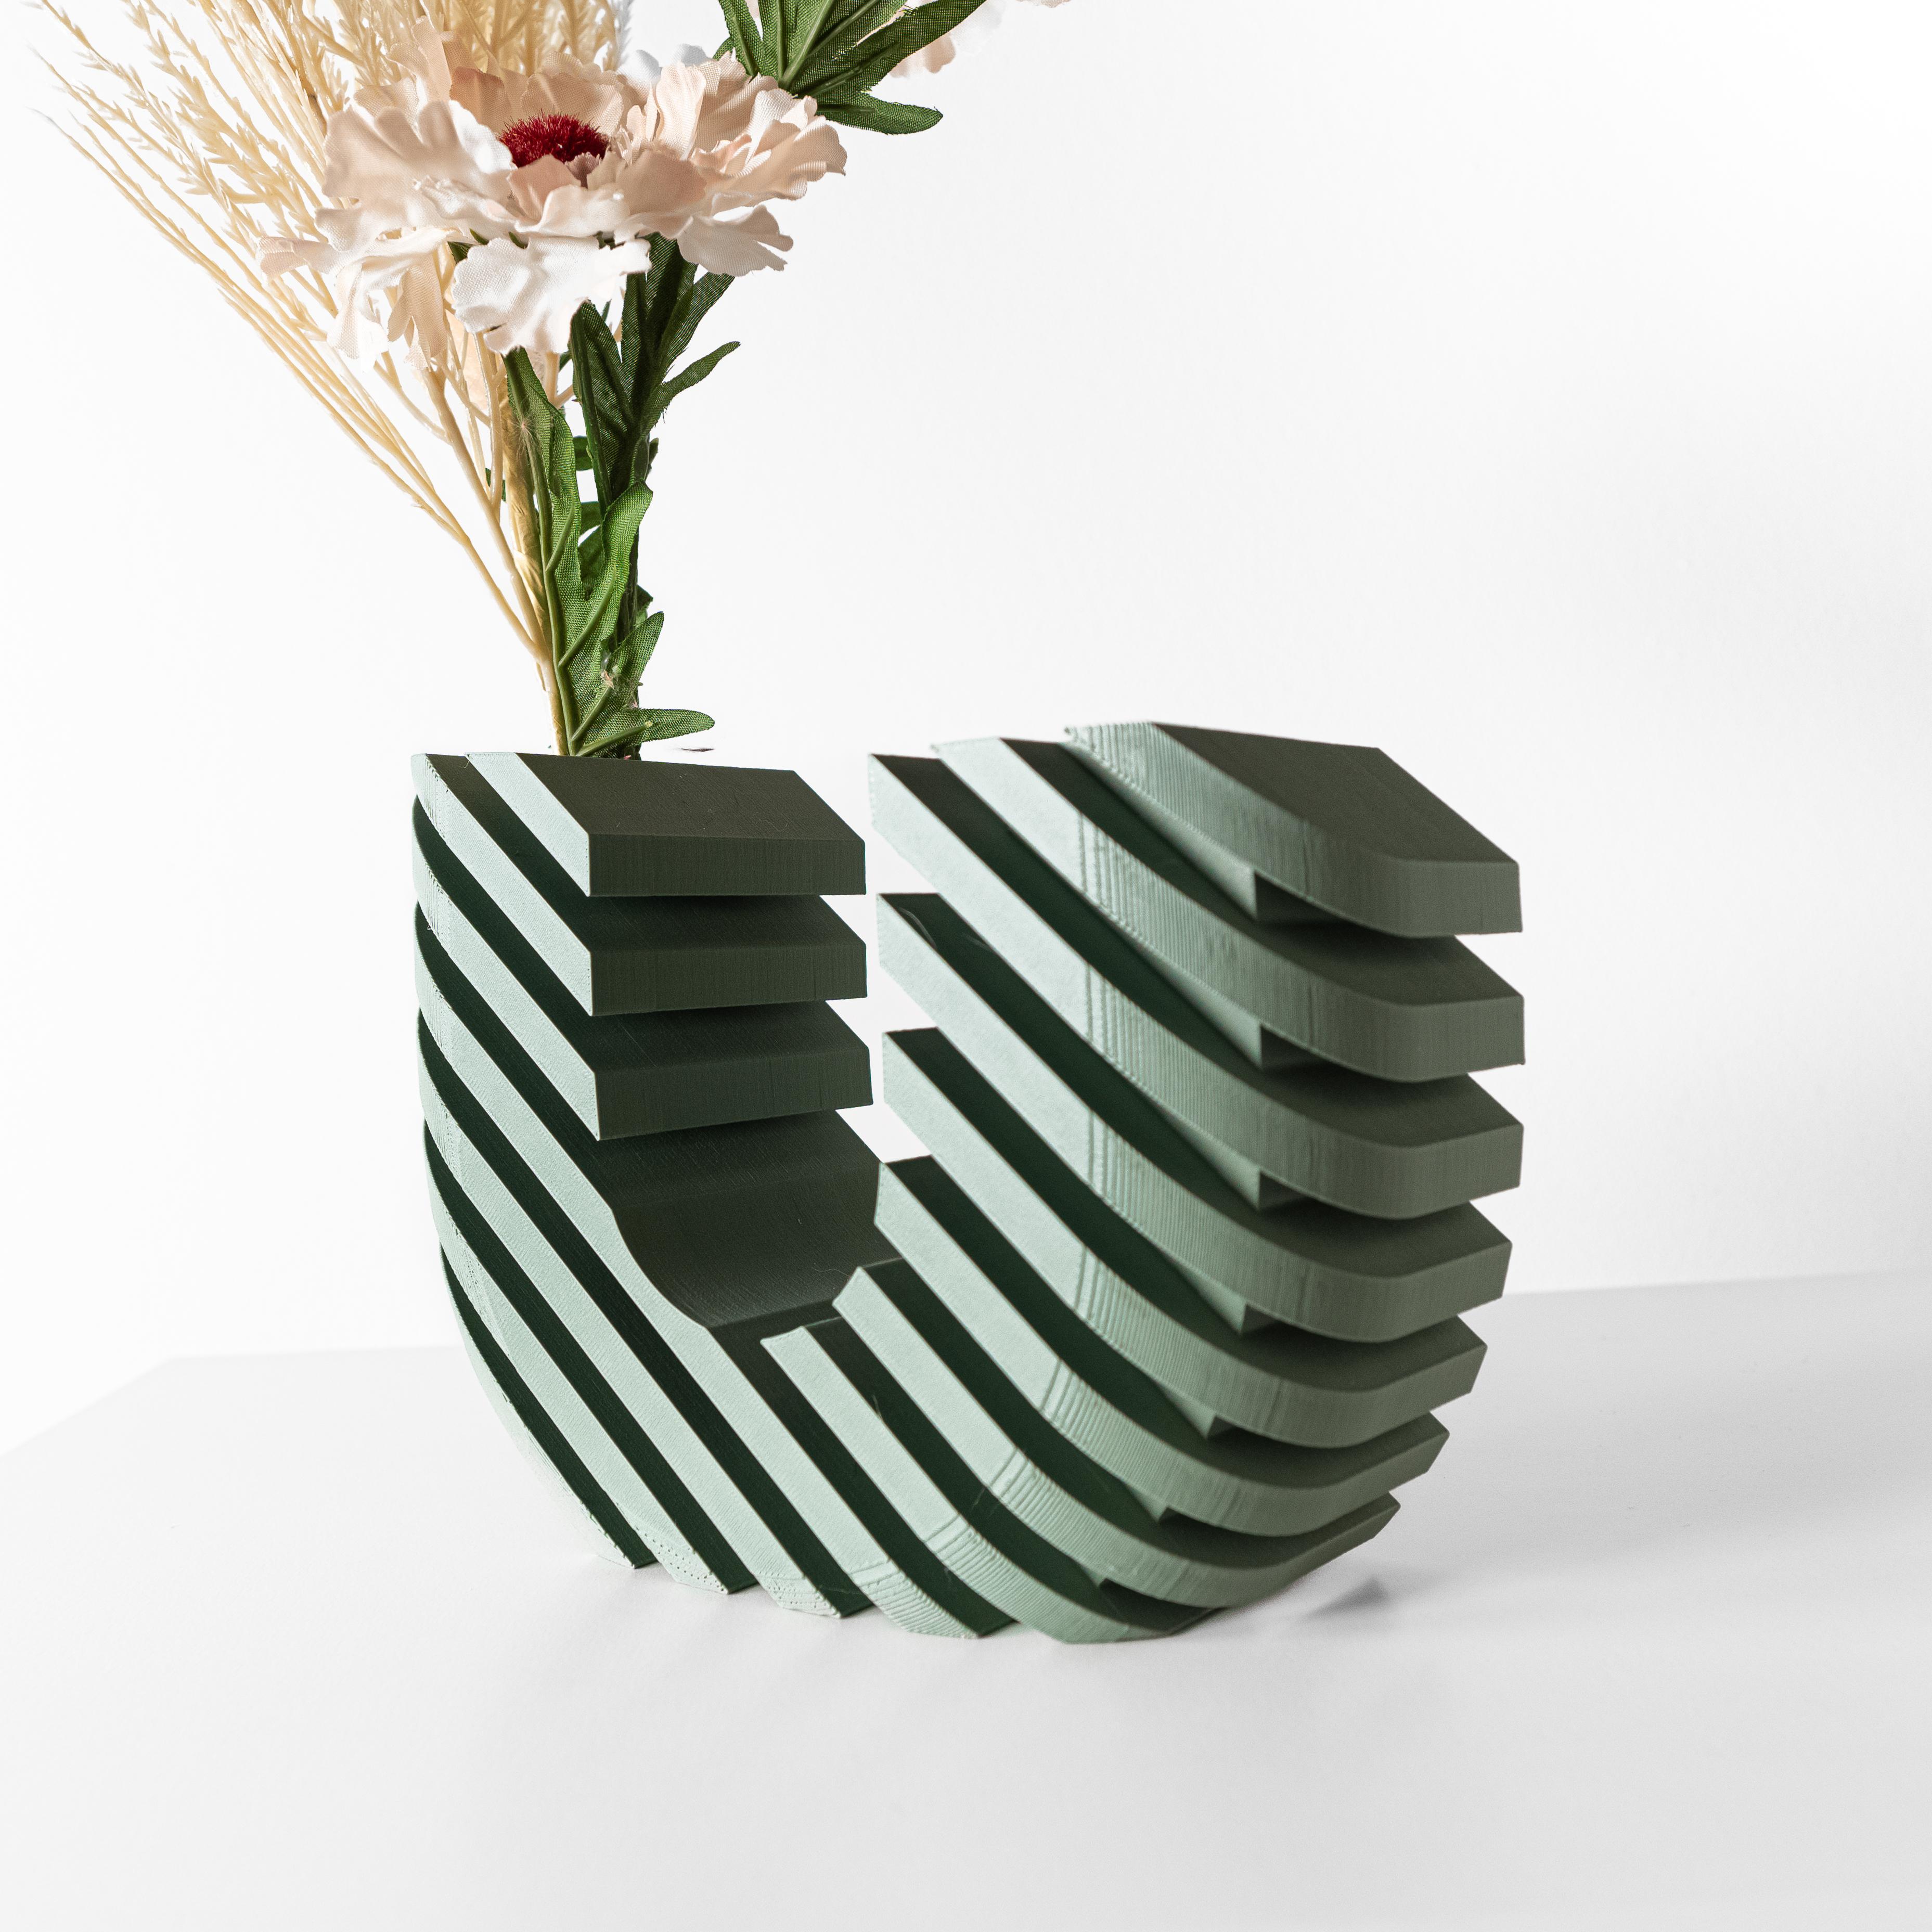 The Wiko U-Vase, Modern and Unique Home Decor for Dried and Preserved Flower Arrangement 3d model